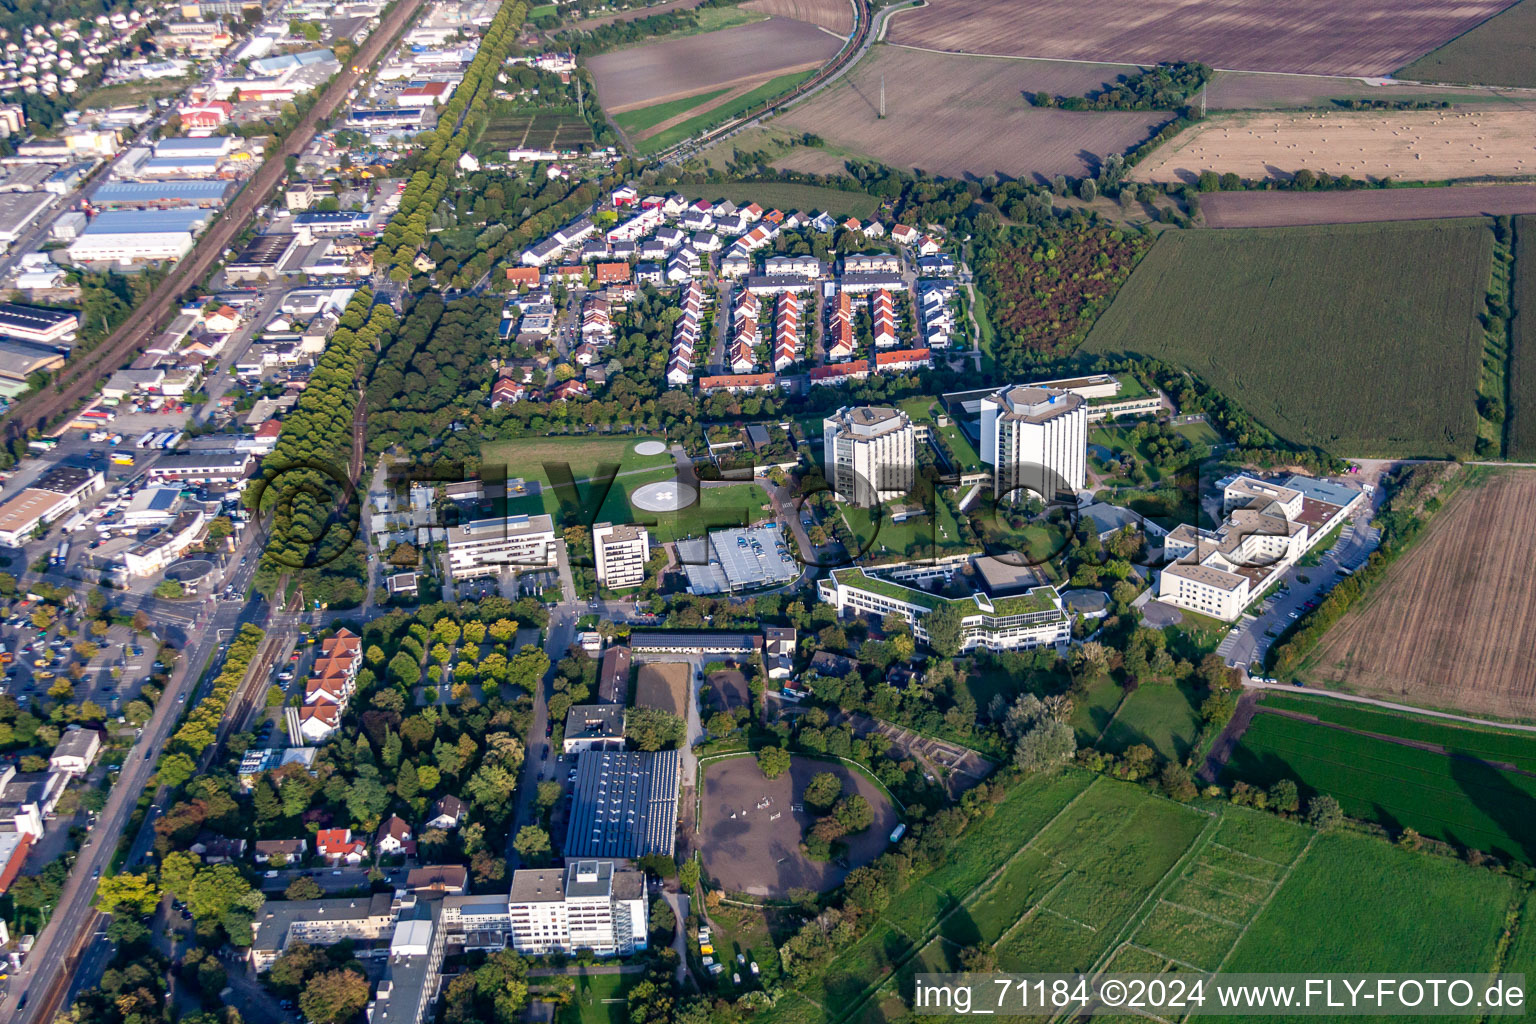 Aerial photograpy of BG accident clinic in the district Oggersheim in Ludwigshafen am Rhein in the state Rhineland-Palatinate, Germany